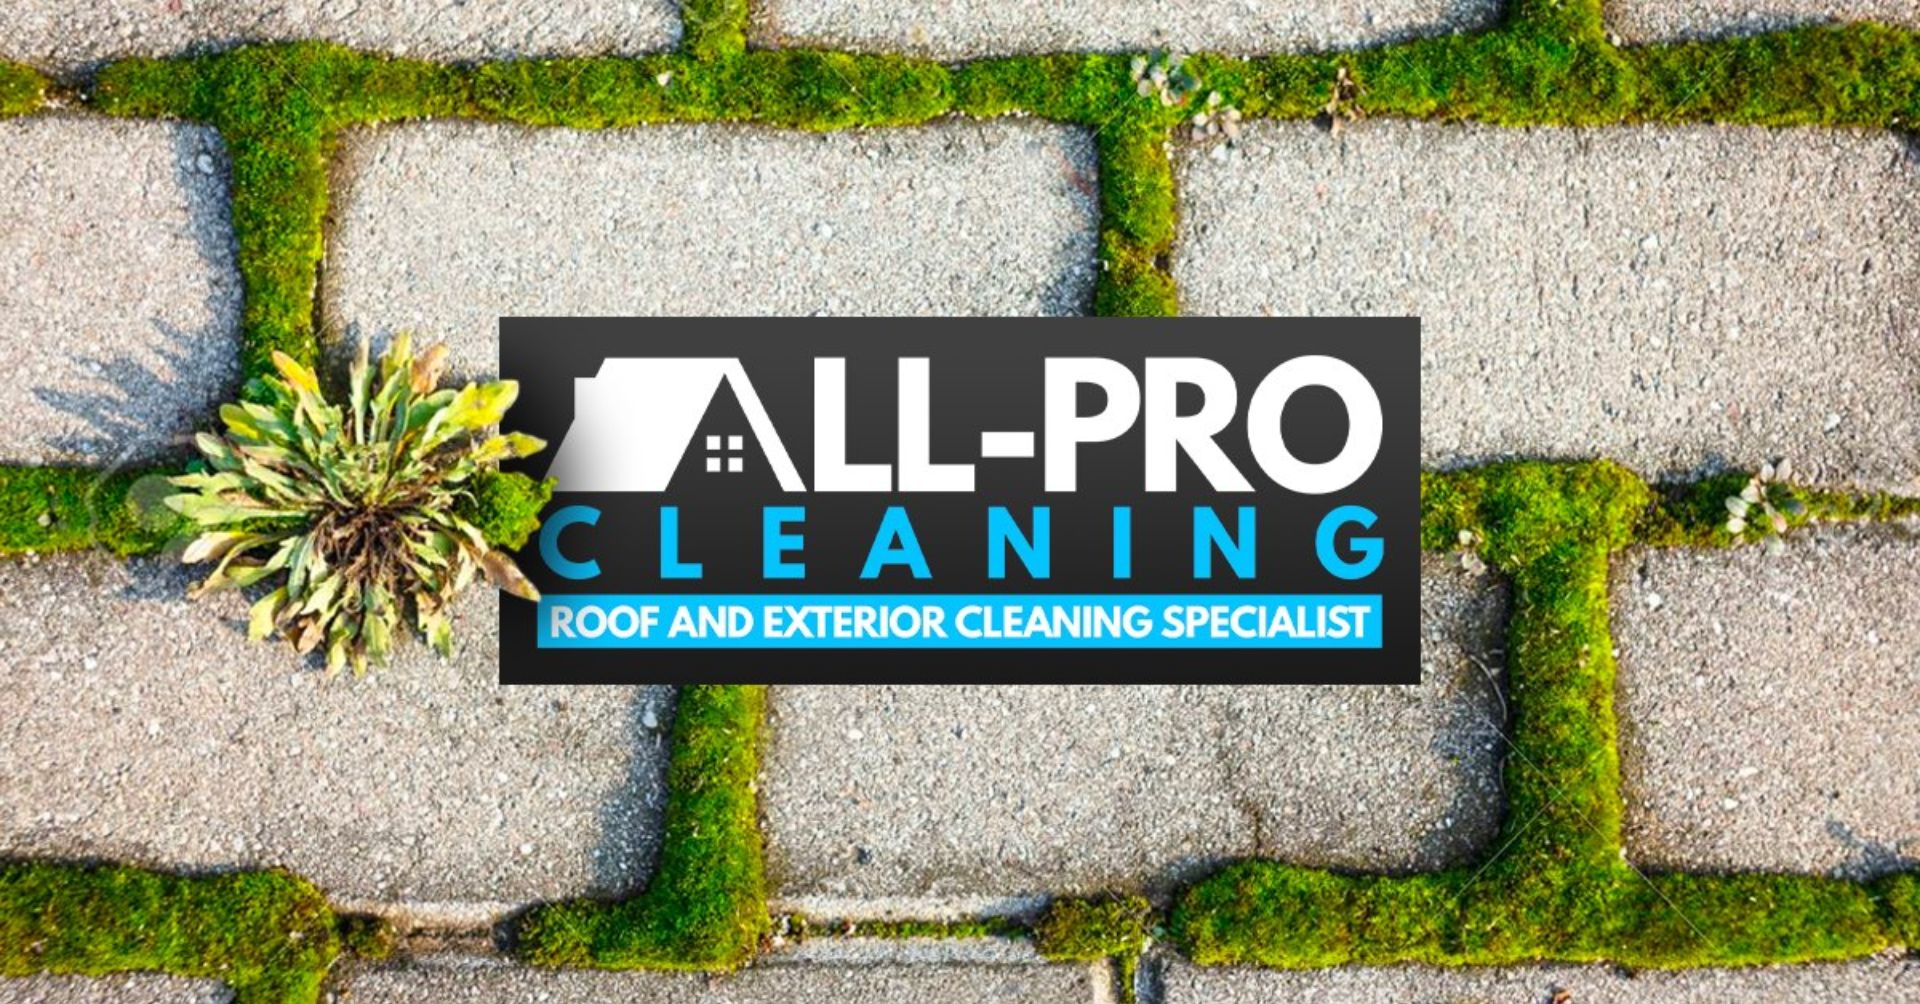 exterior cleaning specialists